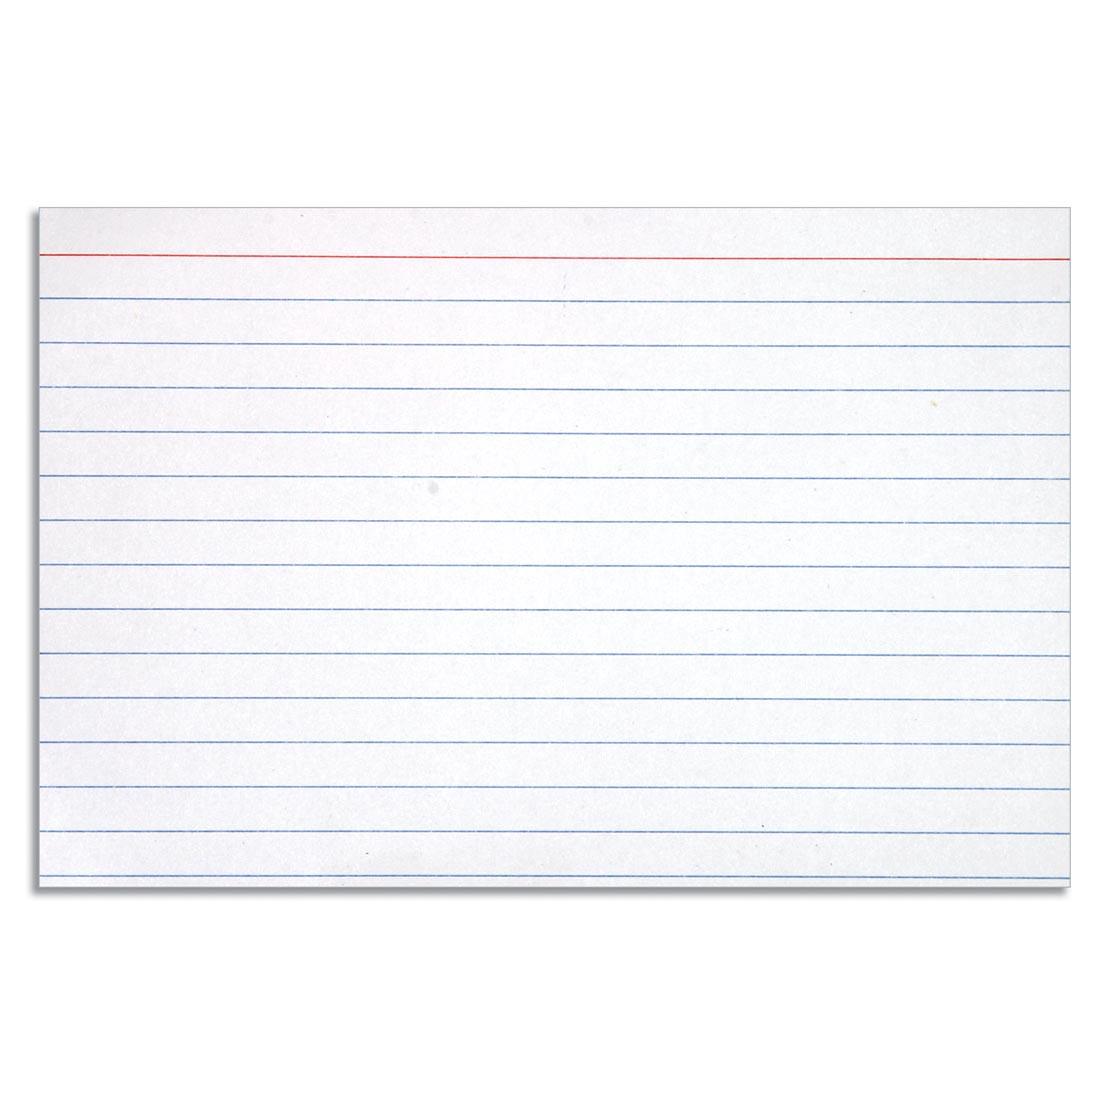 NEW Mead Ruled Index Cards White Pack of 100